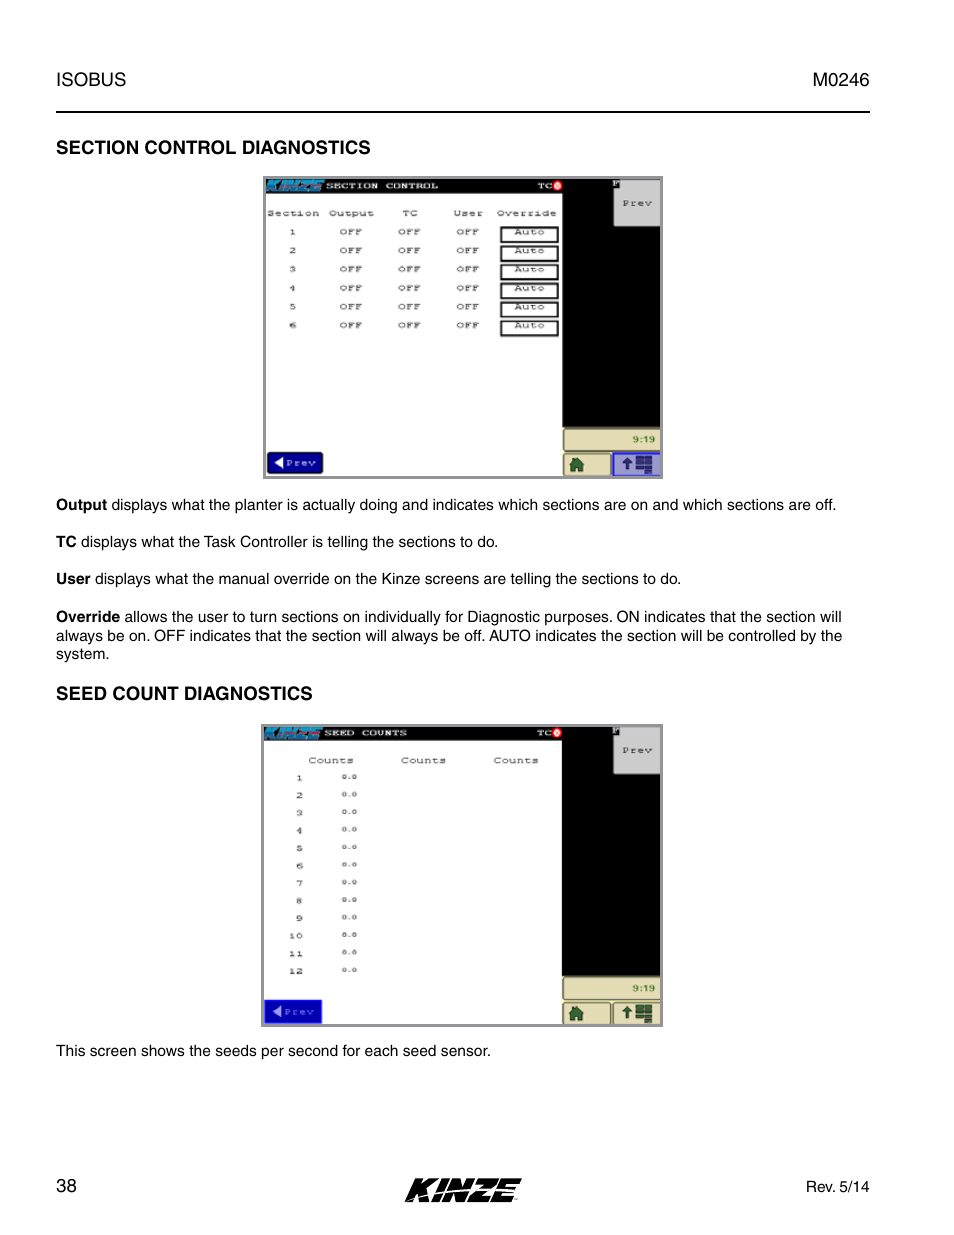 Section control diagnostics, Seed count diagnostics, Section control diagnostics seed count diagnostics | Kinze ISOBUS Electronics Package (3000 Series) Rev. 5/14 User Manual | Page 44 / 46